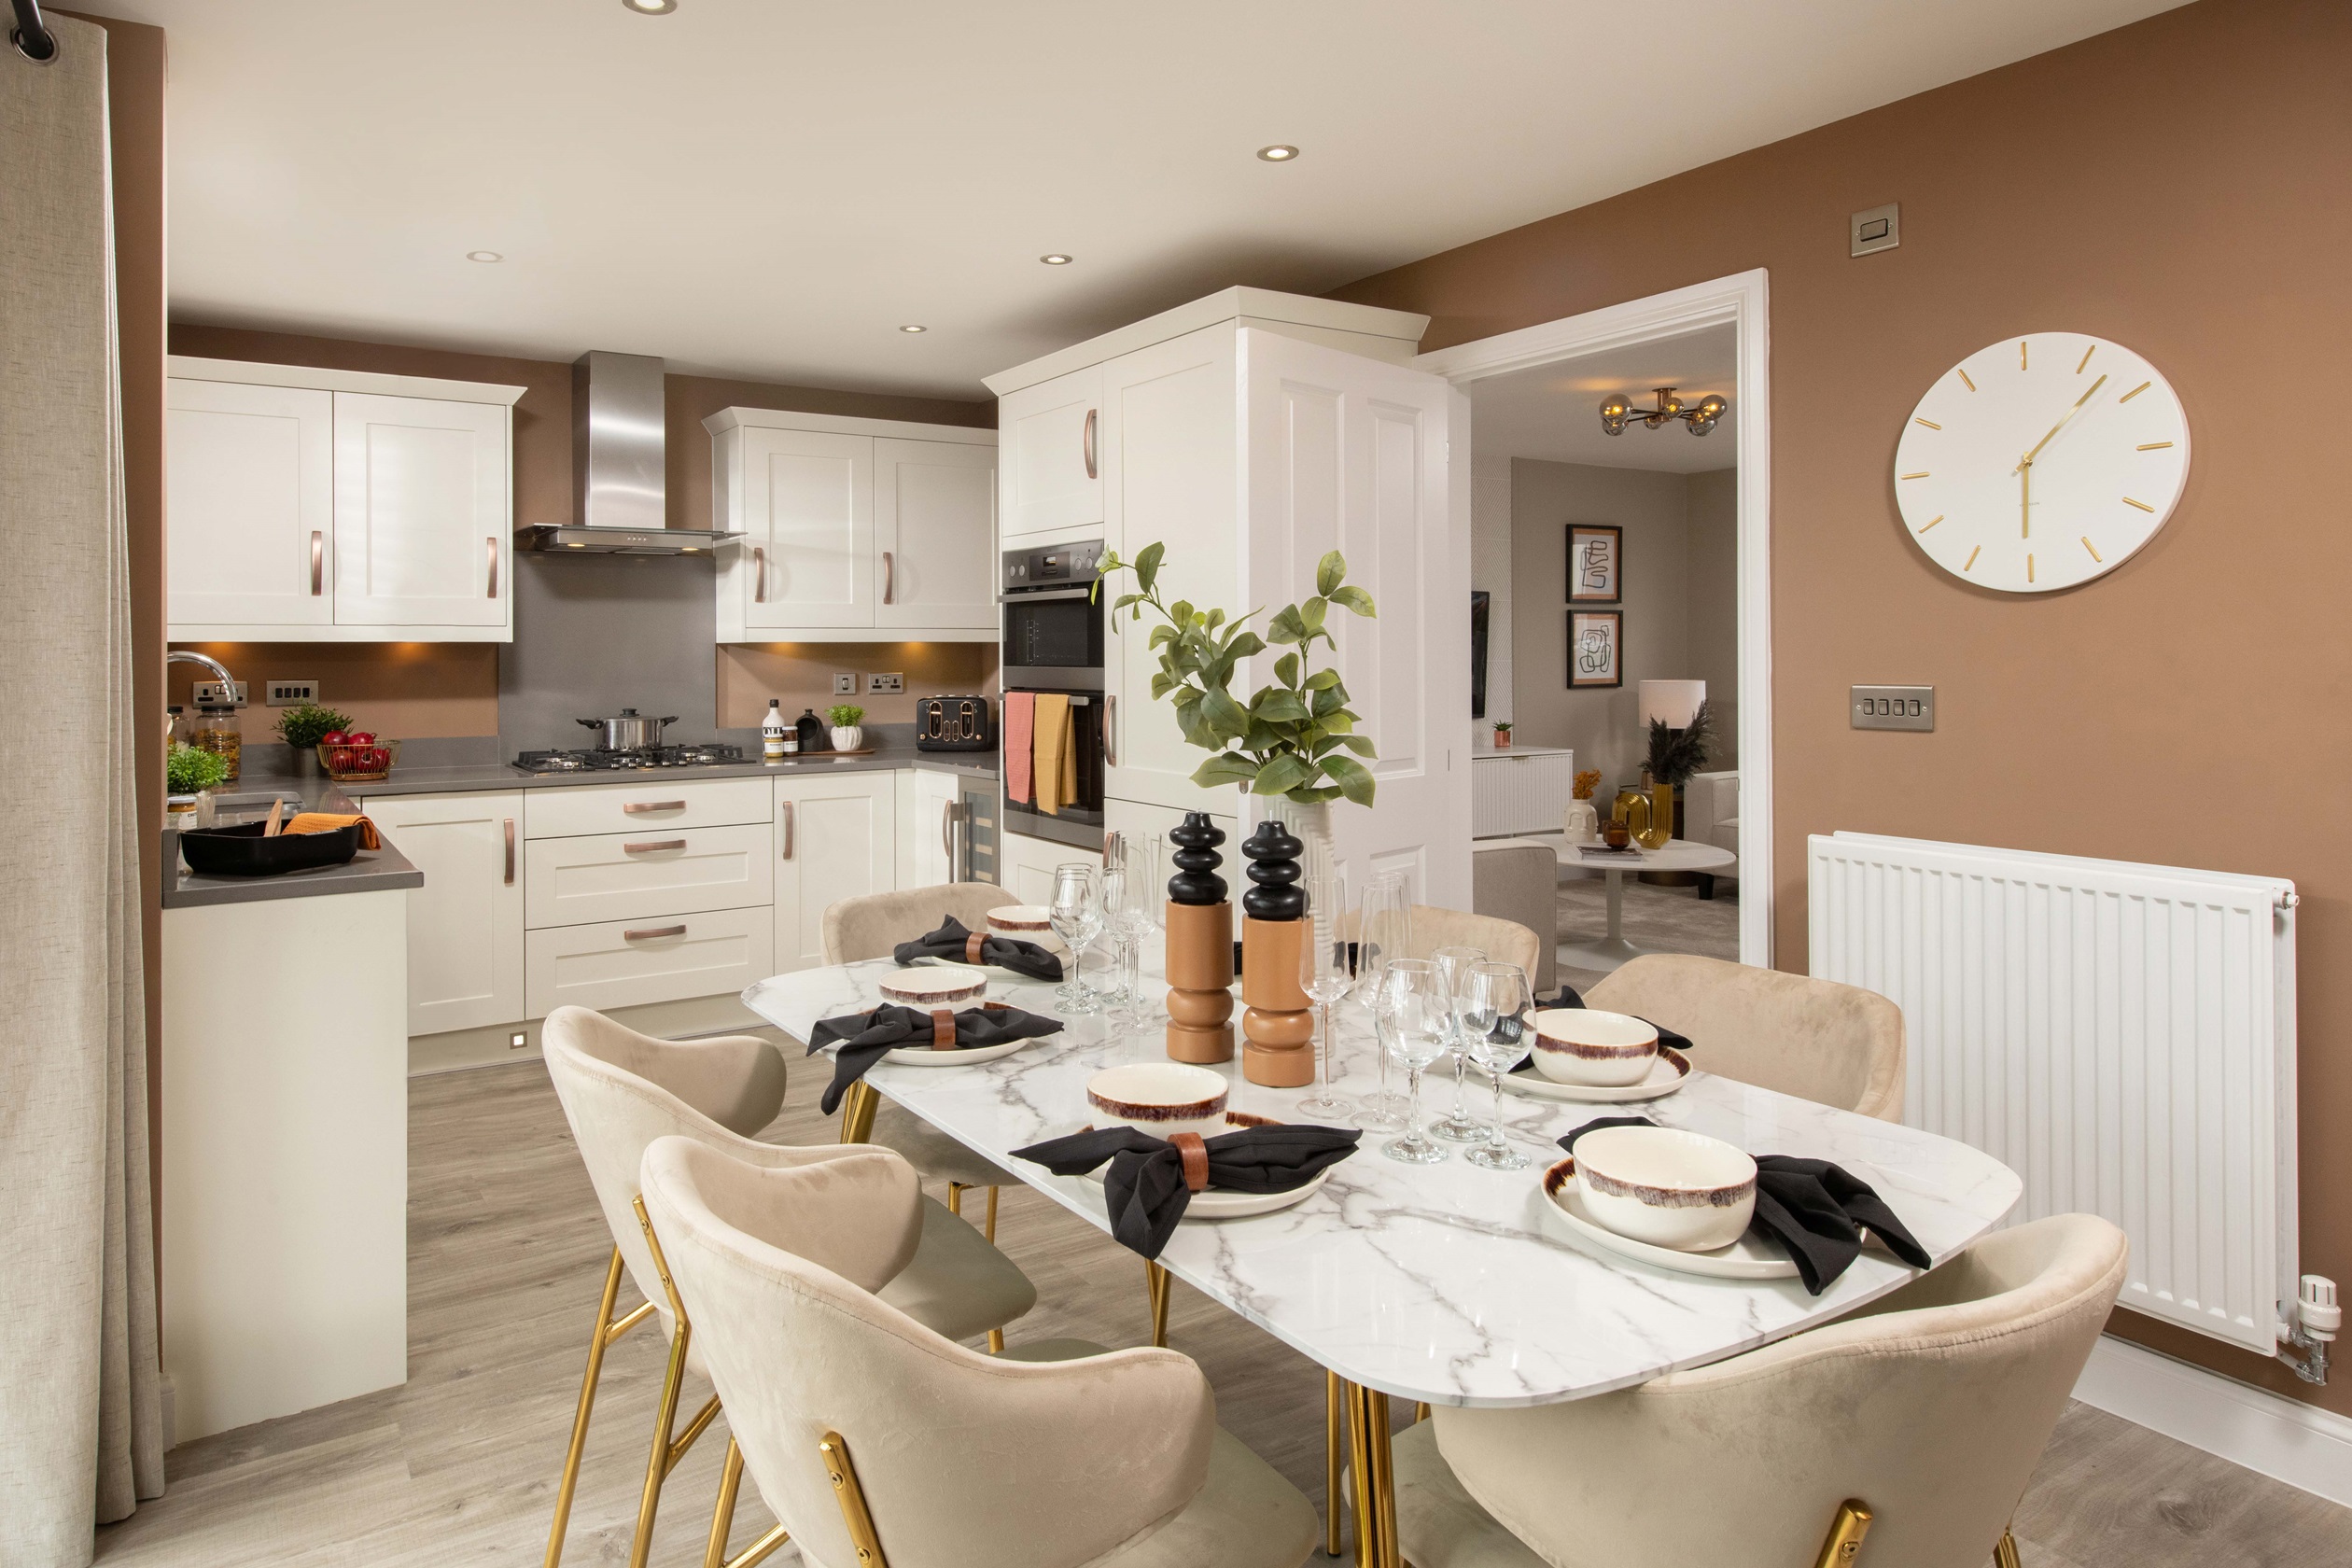 Property 2 of 10. Bar Yw Affinity Windermere Show Home